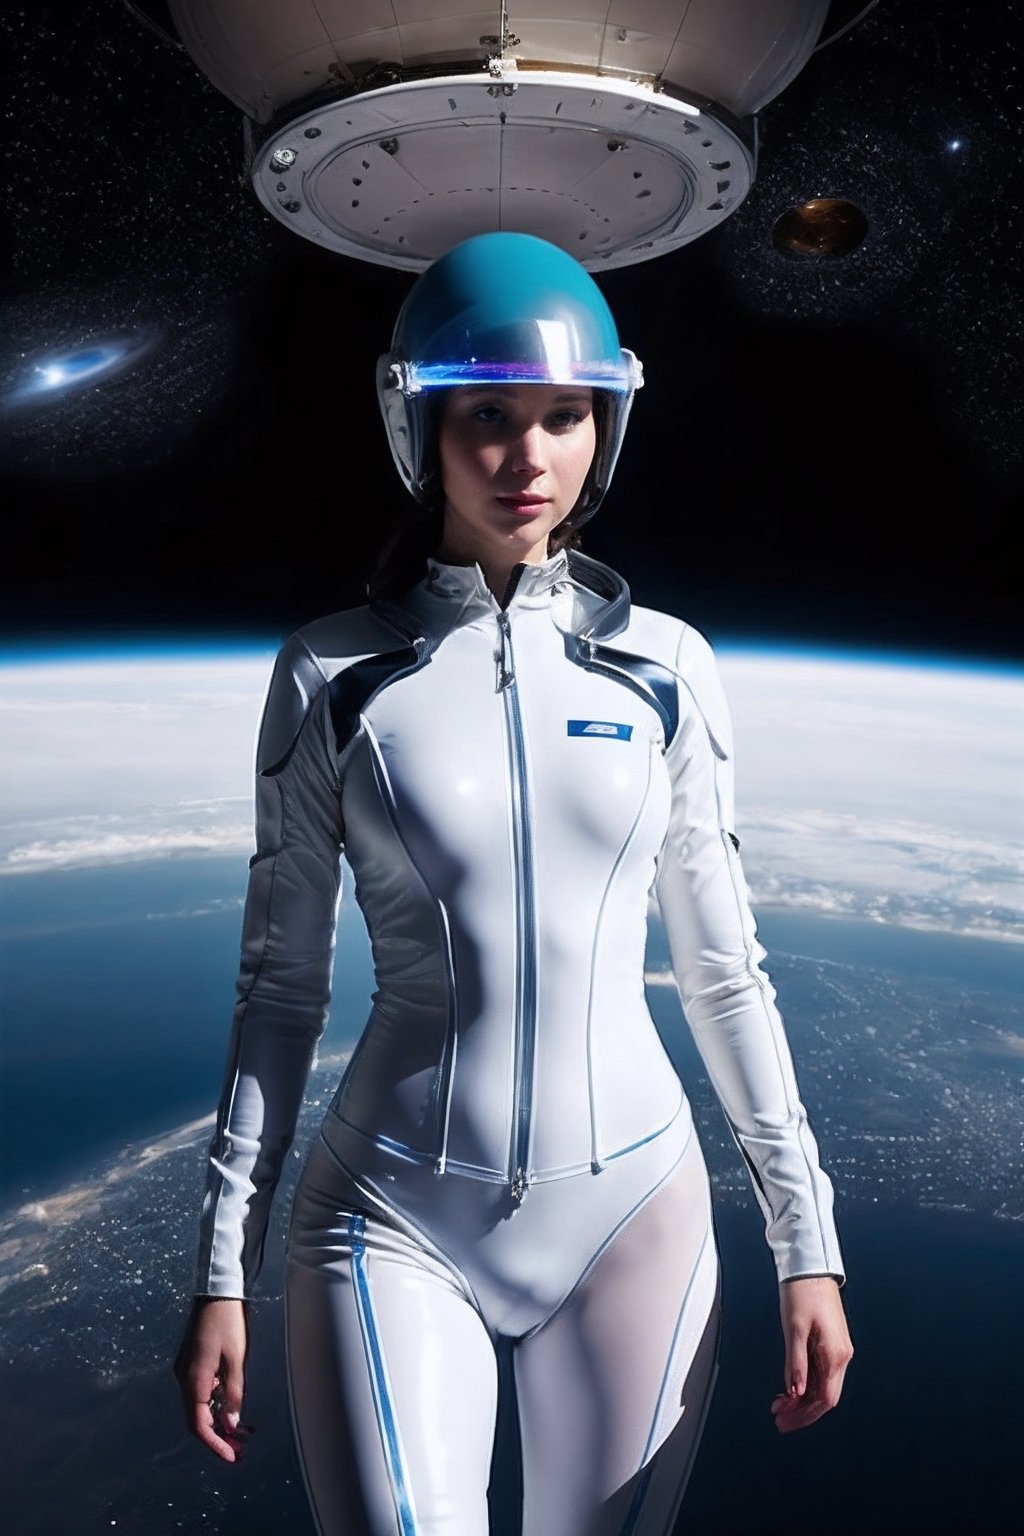 Photograph of Jennifer Lawrence, white latex suit with thin electric blue lines. Transparent helmet, holographic displays. Spaceship Control Room, windows showing planet Earth from space, Futuristic Technology, Athletic, skinny, 30 years old, happy, Full Figure